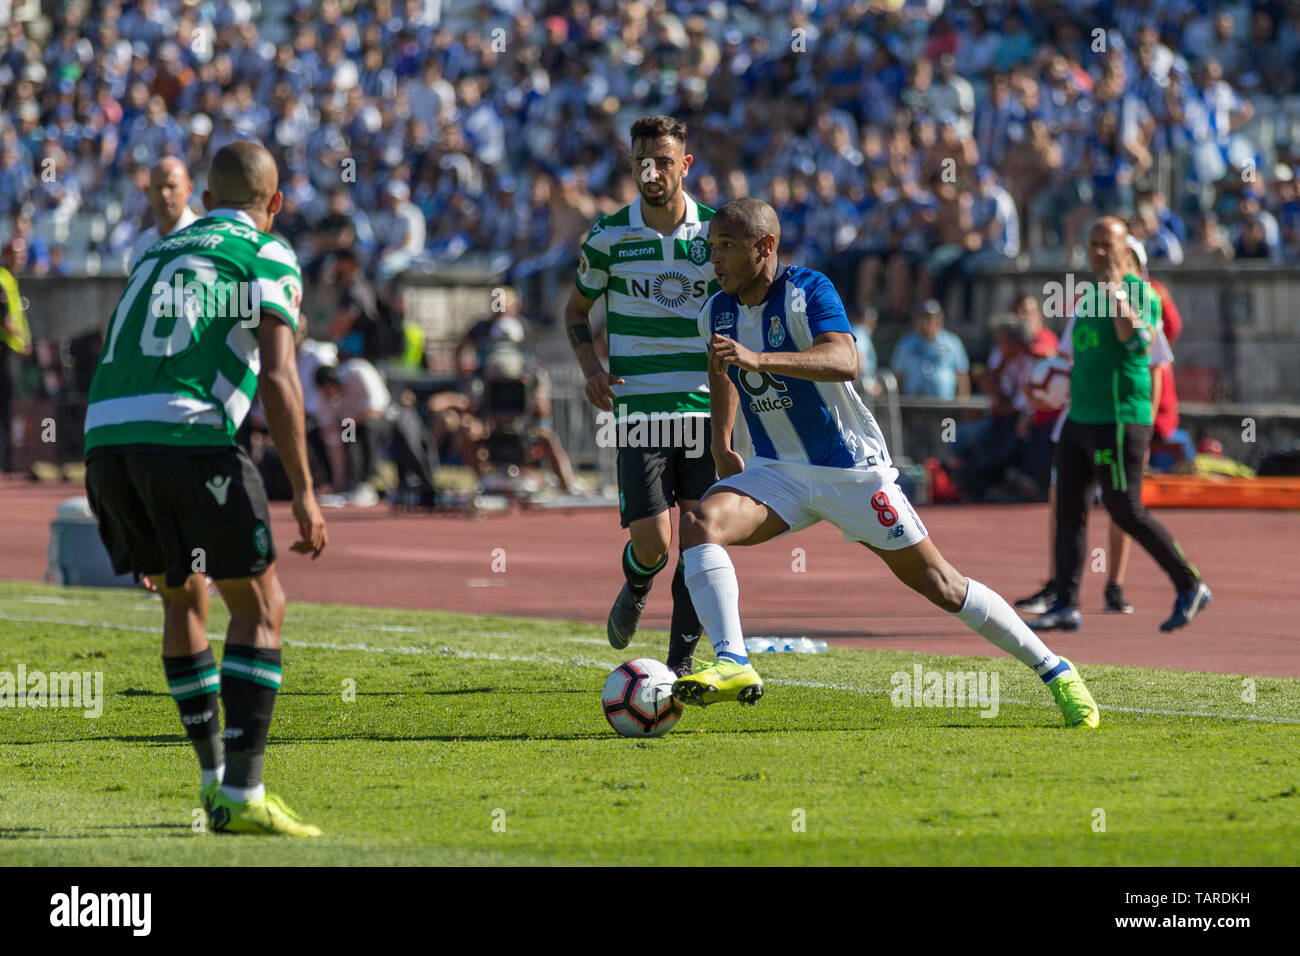 May 25, 2019. Oeiras, Portugal. Porto's forward from Argelia Yacine Brahimi (8) in action during the game Sporting CP vs FC Porto © Alexandre de Sousa/Alamy Live News Stock Photo